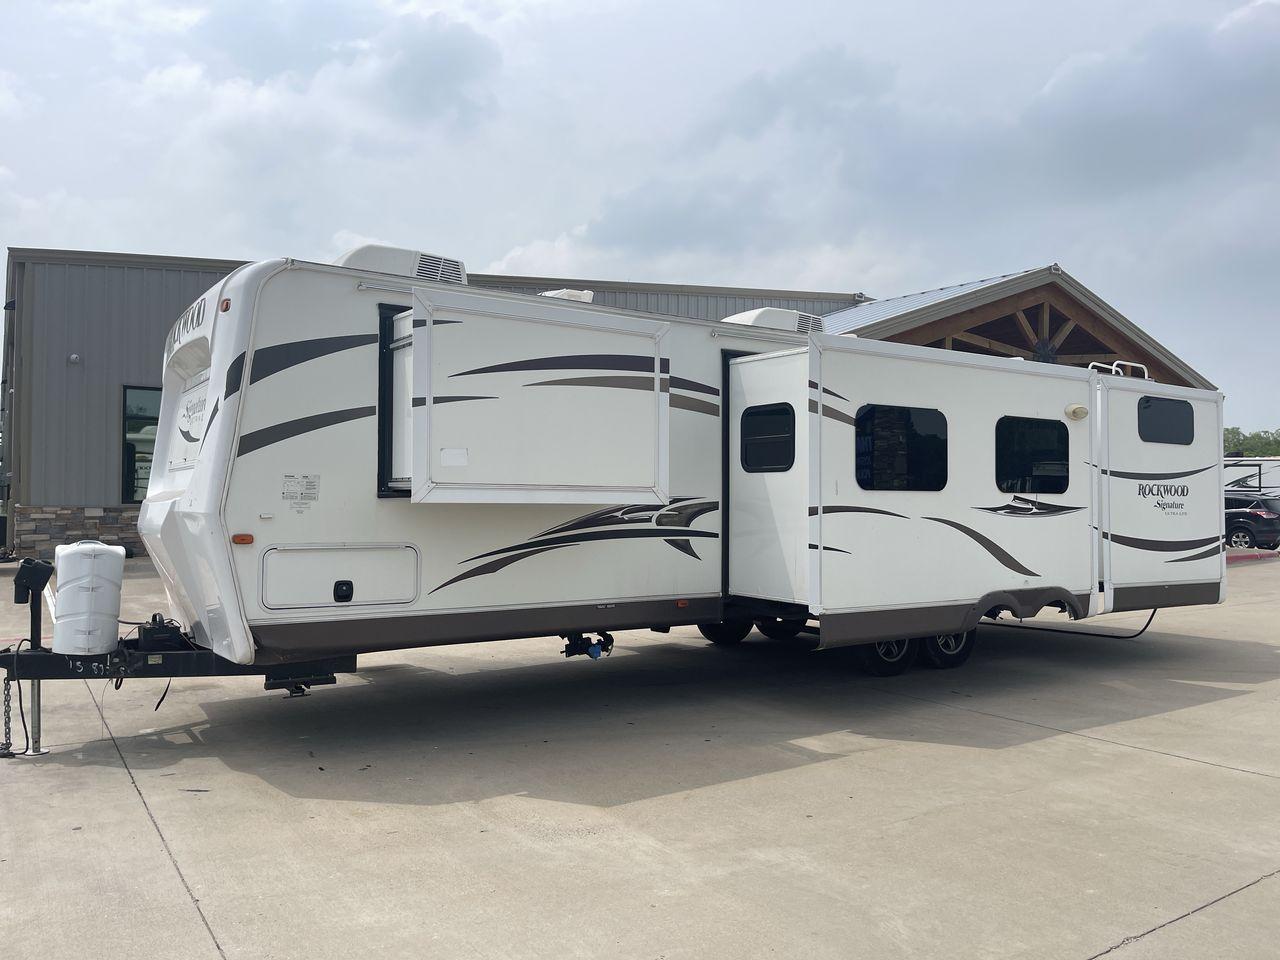 2015 WHITE FOREST RIVER ROCKWOOD 8327SS (4X4TRLH24F1) , Length: 35.25 ft. | Dry Weight: 7,694 lbs. | Gross Weight: 9,150 lbs. | Slides: 4 transmission, located at 4319 N Main Street, Cleburne, TX, 76033, (817) 221-0660, 32.435829, -97.384178 - This 2015 Forest River Rockwood 8327SS travel trailer measures 35.25 ft. It has a width of 8 ft and a height of 9.83 ft. The dry weight is 7,694 lbs, and the payload capacity is 1,456 lbs. It has a GVWR of 9,150 lbs and a hitch weight of 1,035 lbs. It is constructed out of aluminum body material and - Photo #23